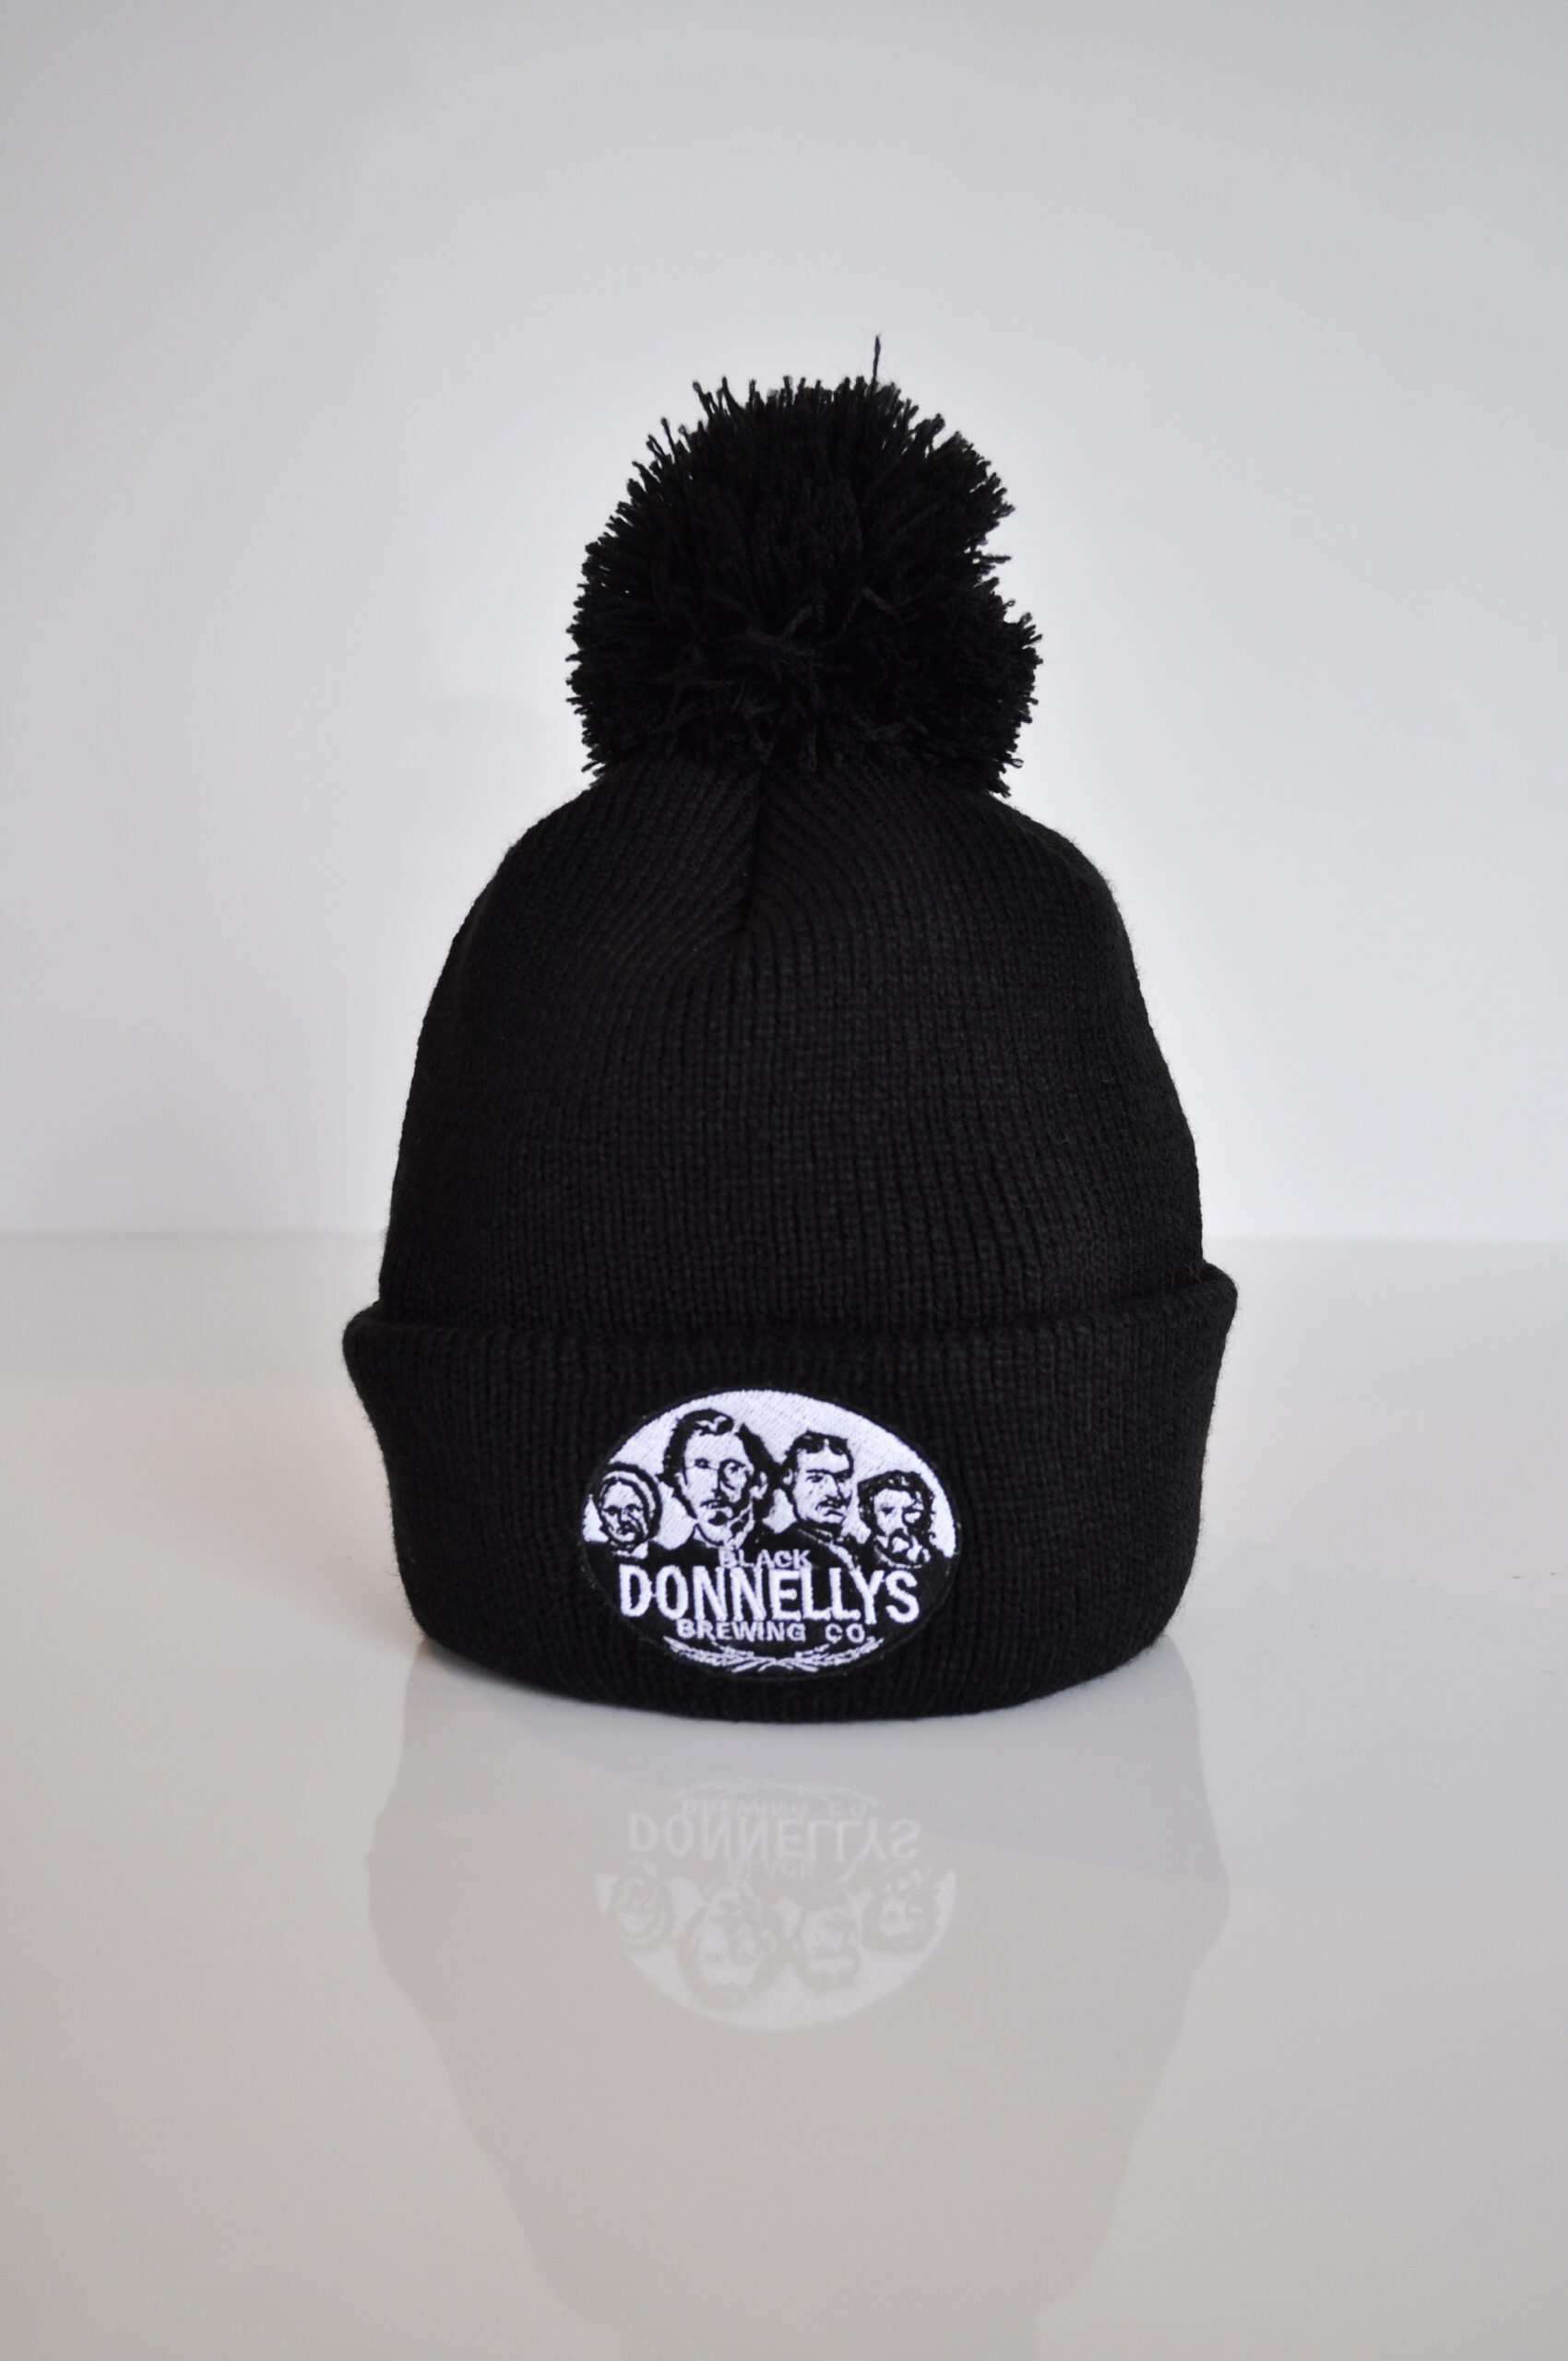 A Black Donnellys Brewing Company Toque Style Winter Hat Topped With Pom-pom And Black And White Company Logo On The Folded Brim.